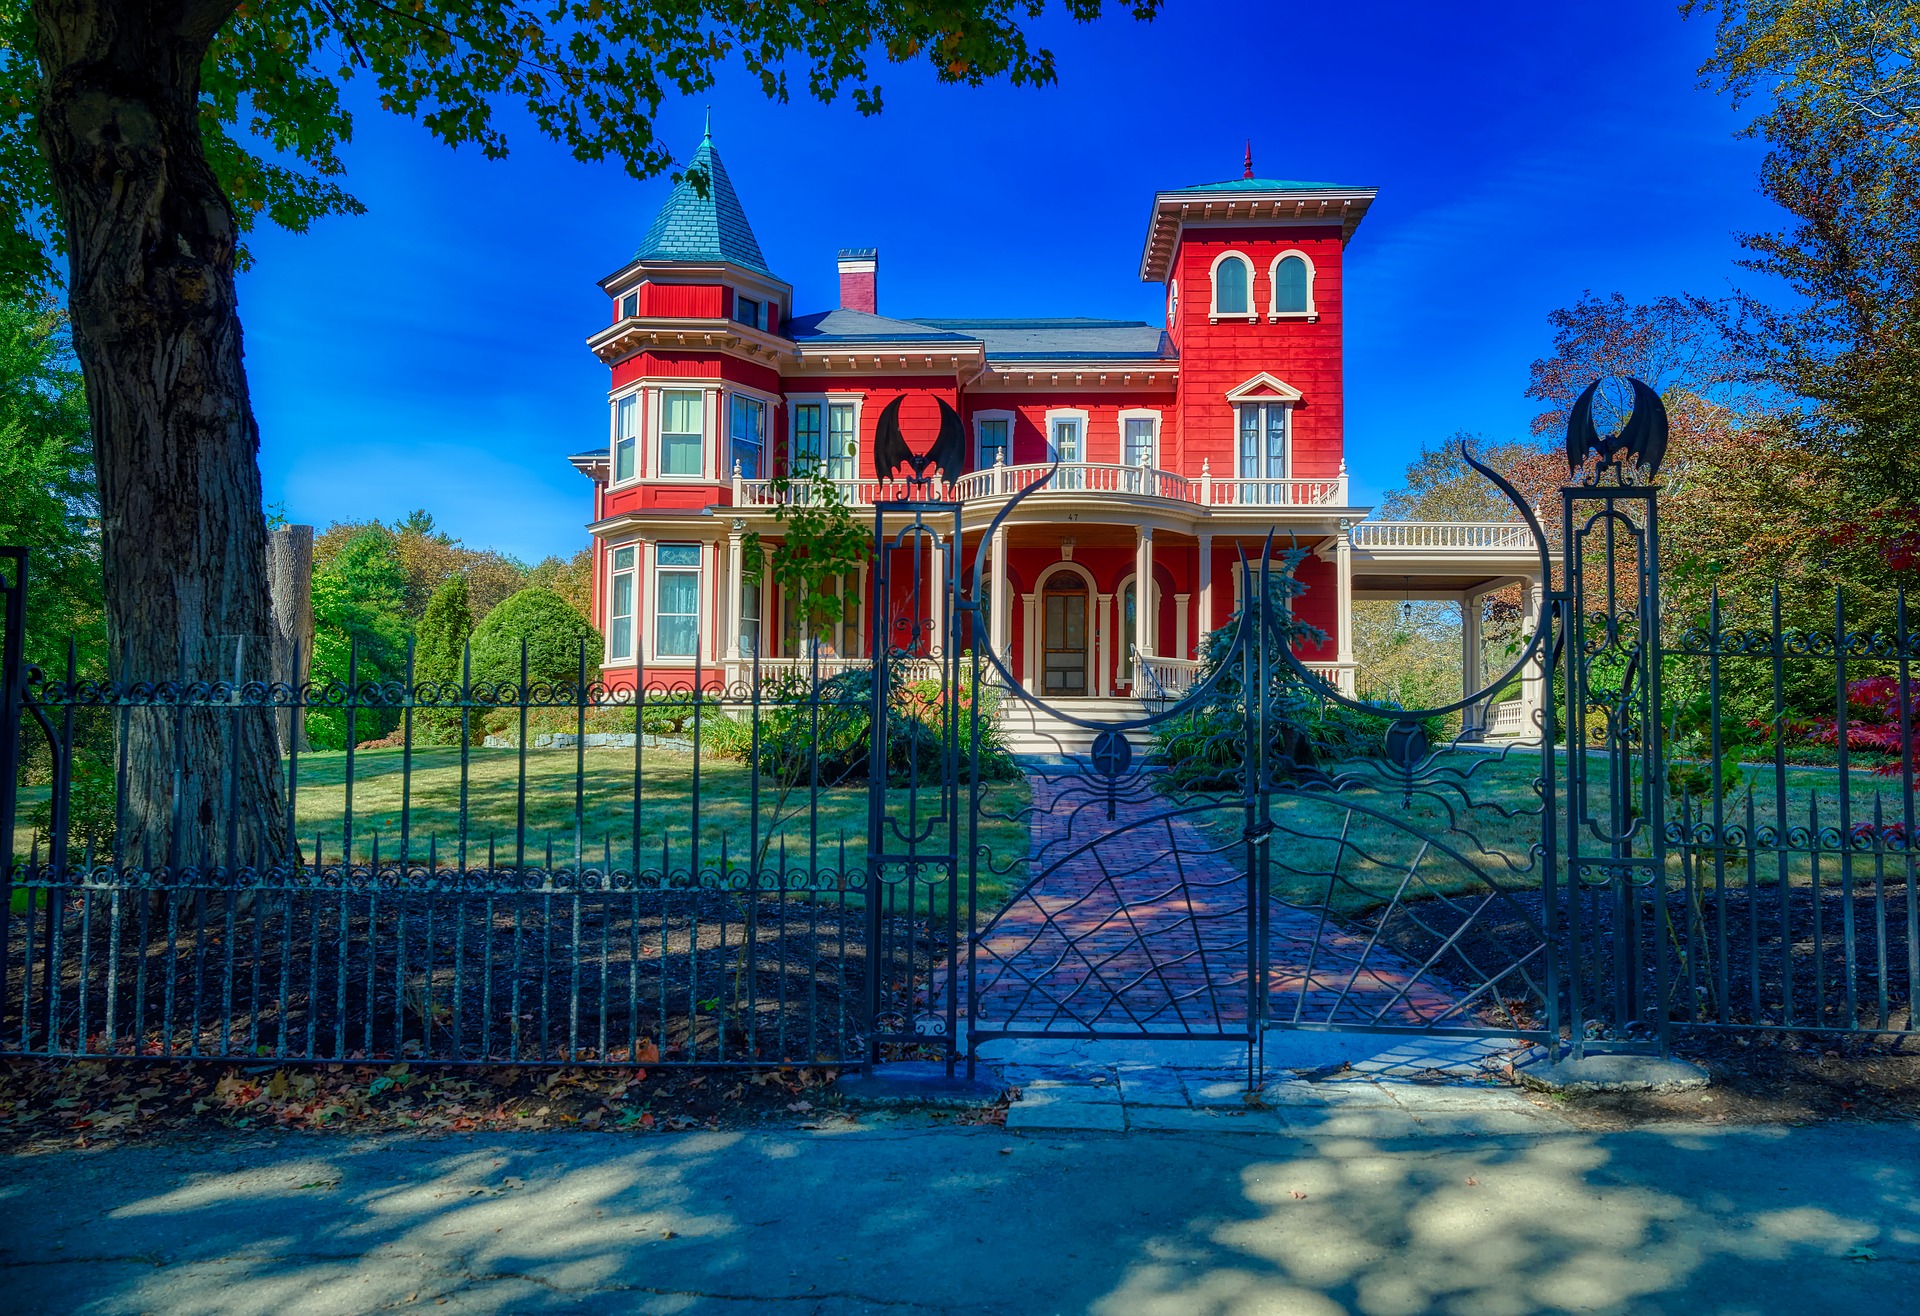 large, ornate Victorian-style house with red and blue exterior walls, a wraparound porch, and a distinctive turret. A decorative wrought iron fence with an open gate stands in the foreground, and the house is surrounded by a well-kept lawn with trees, under a clear blue sky.